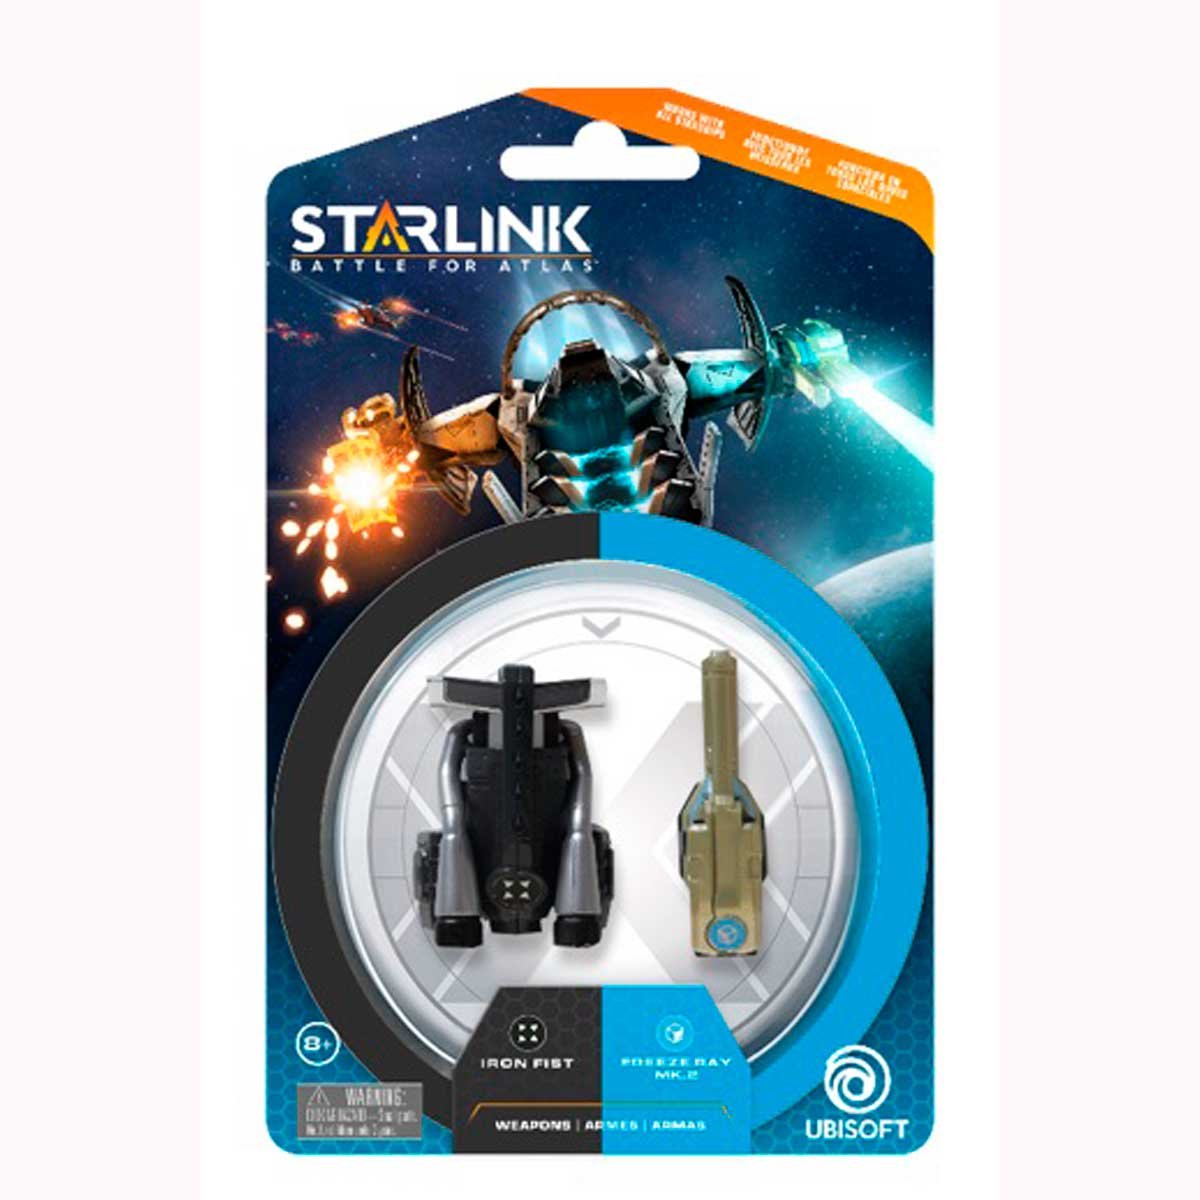 Starlink Battle For Atlas Iron Fist Weapon Pack